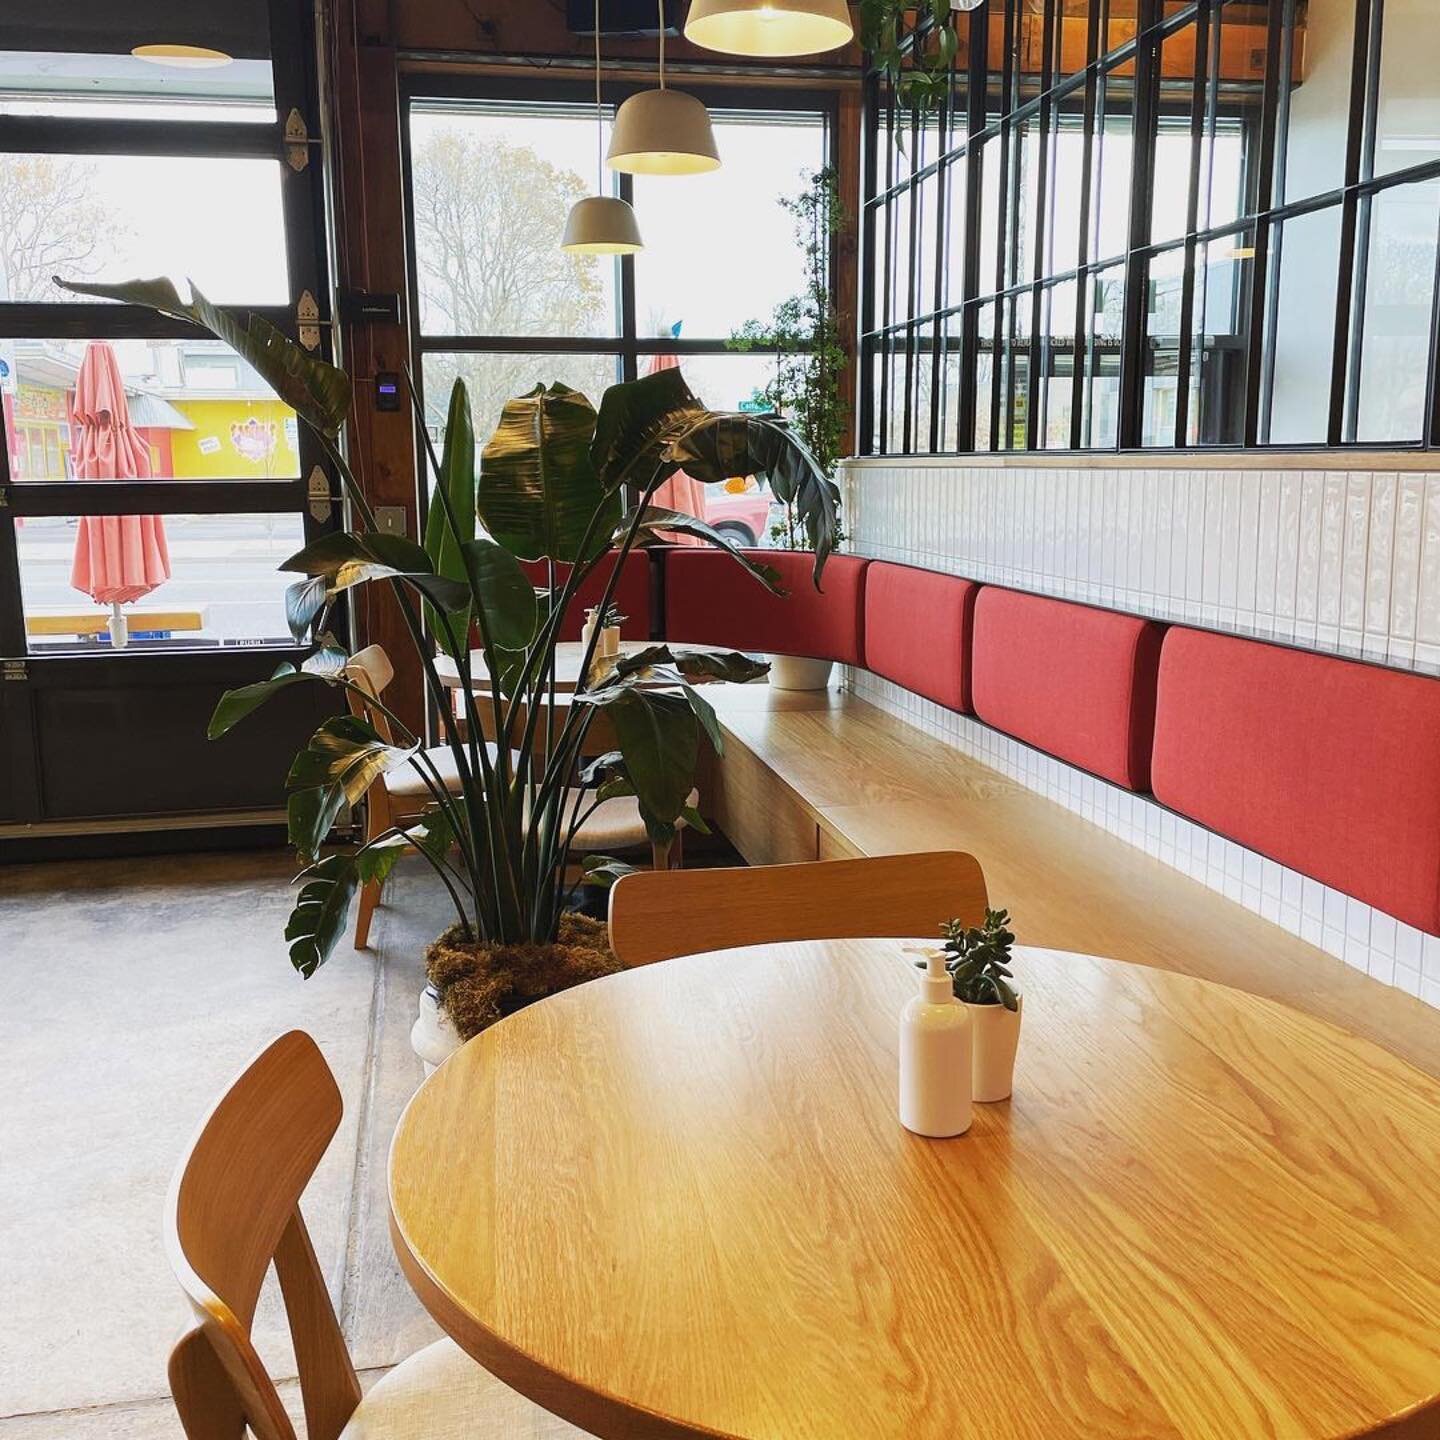 Comfortable textured layers of sunlight greenery fabric wood and steel bring this modern eatery on #Colfax to life. Our friends @foxruncafe make your belly feel just as good on the inside as the space does on the outside. 
In cahoots with: @unum_coll